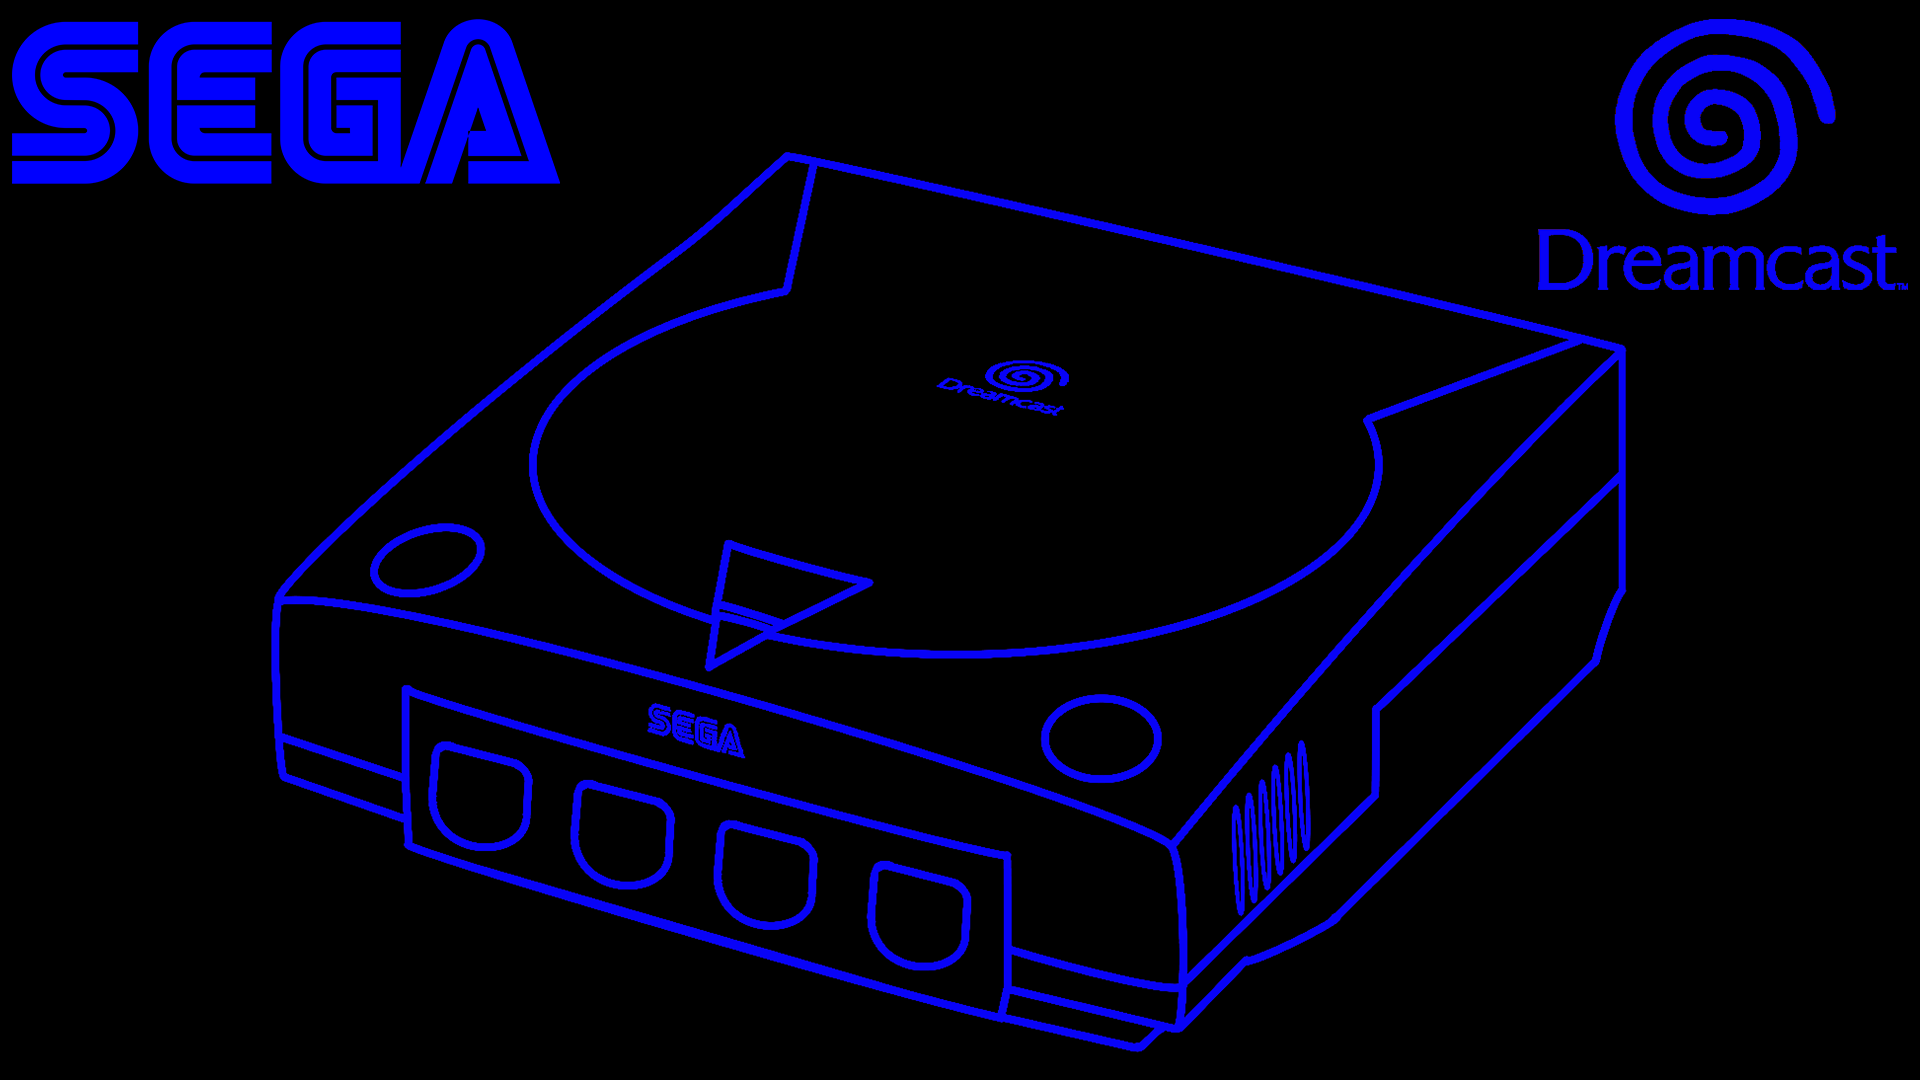 Made these Dreamcast wallpaper! Hope you like them :) Google Drive link in the comments